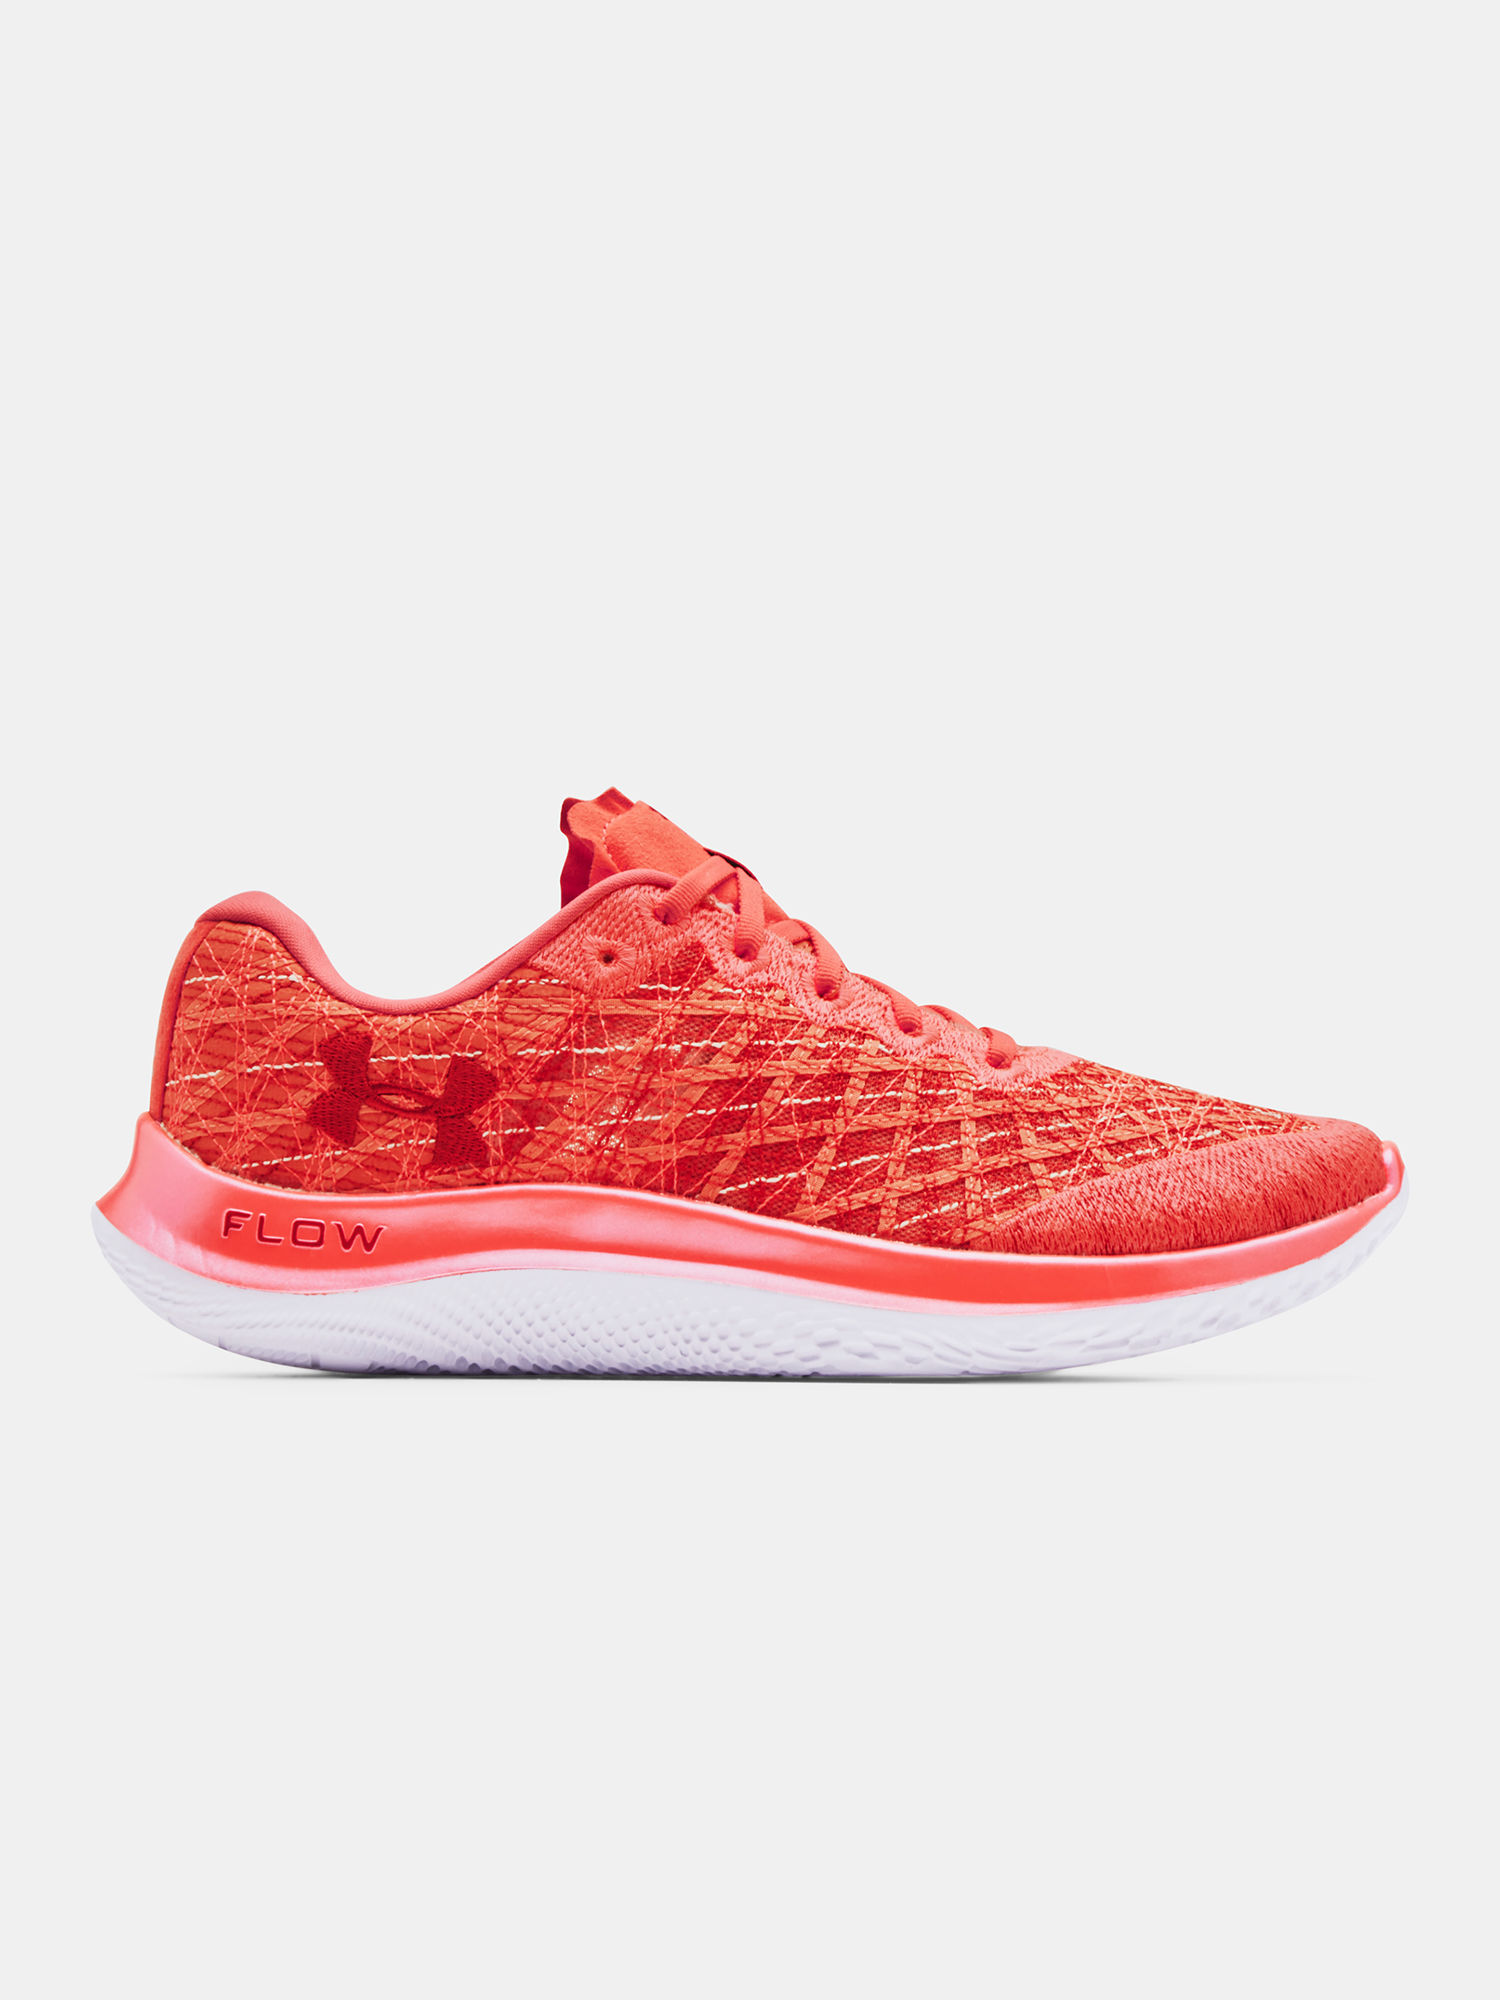 Topánky Under Armour FLOW Velociti Wind-RED (1)